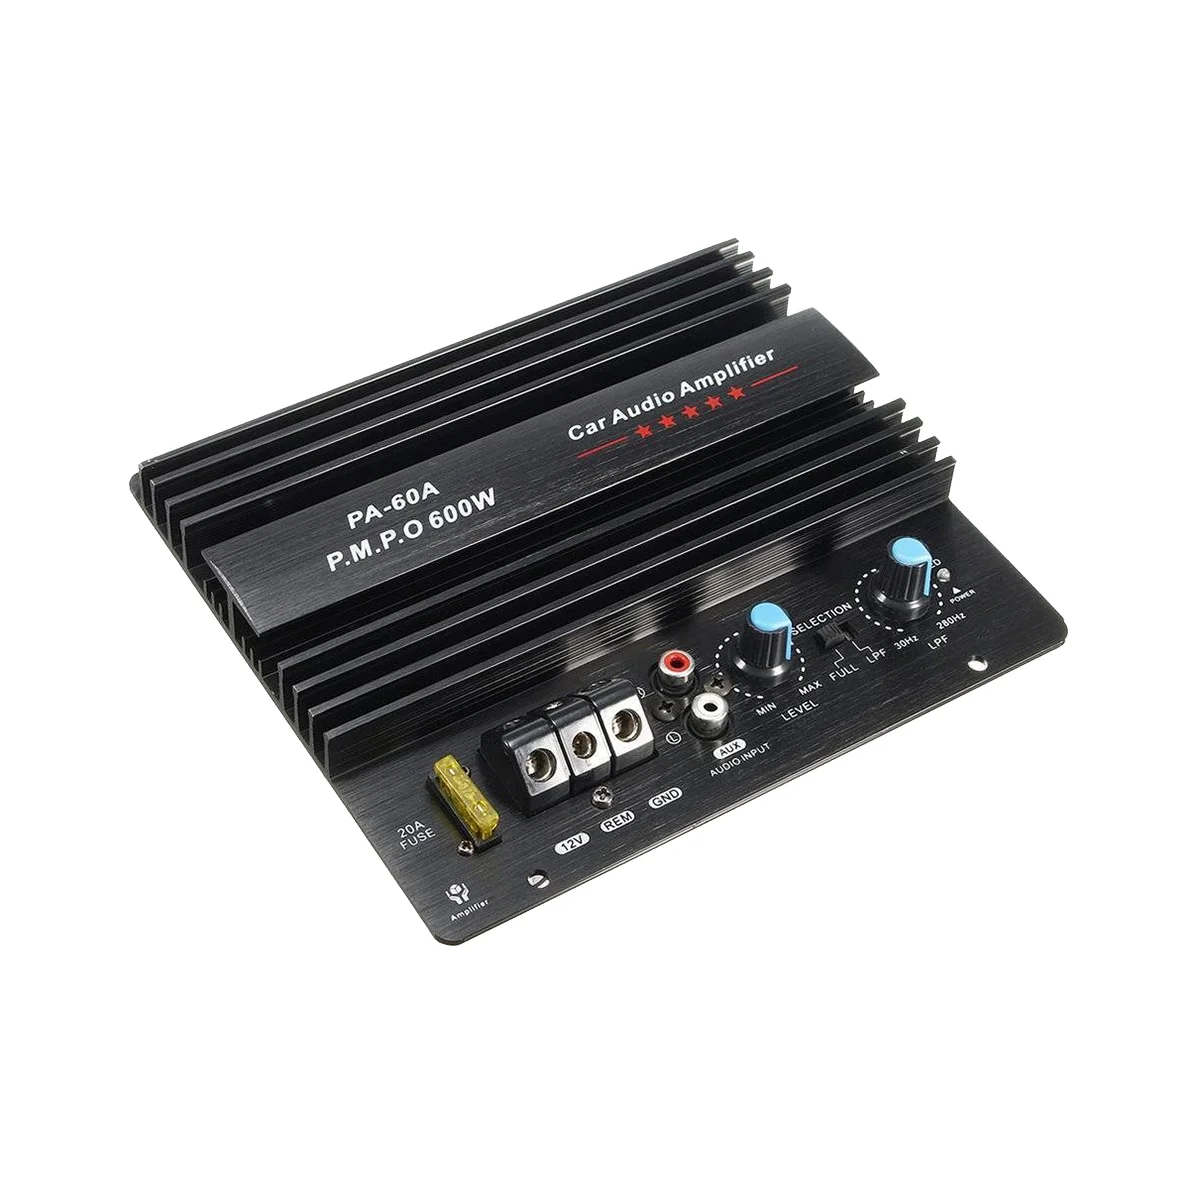 

12V 600W Car Audio Power Amplifier Boord Lossless Subwoofer Bass Module High Power Car Audio Accessories Mono Channel